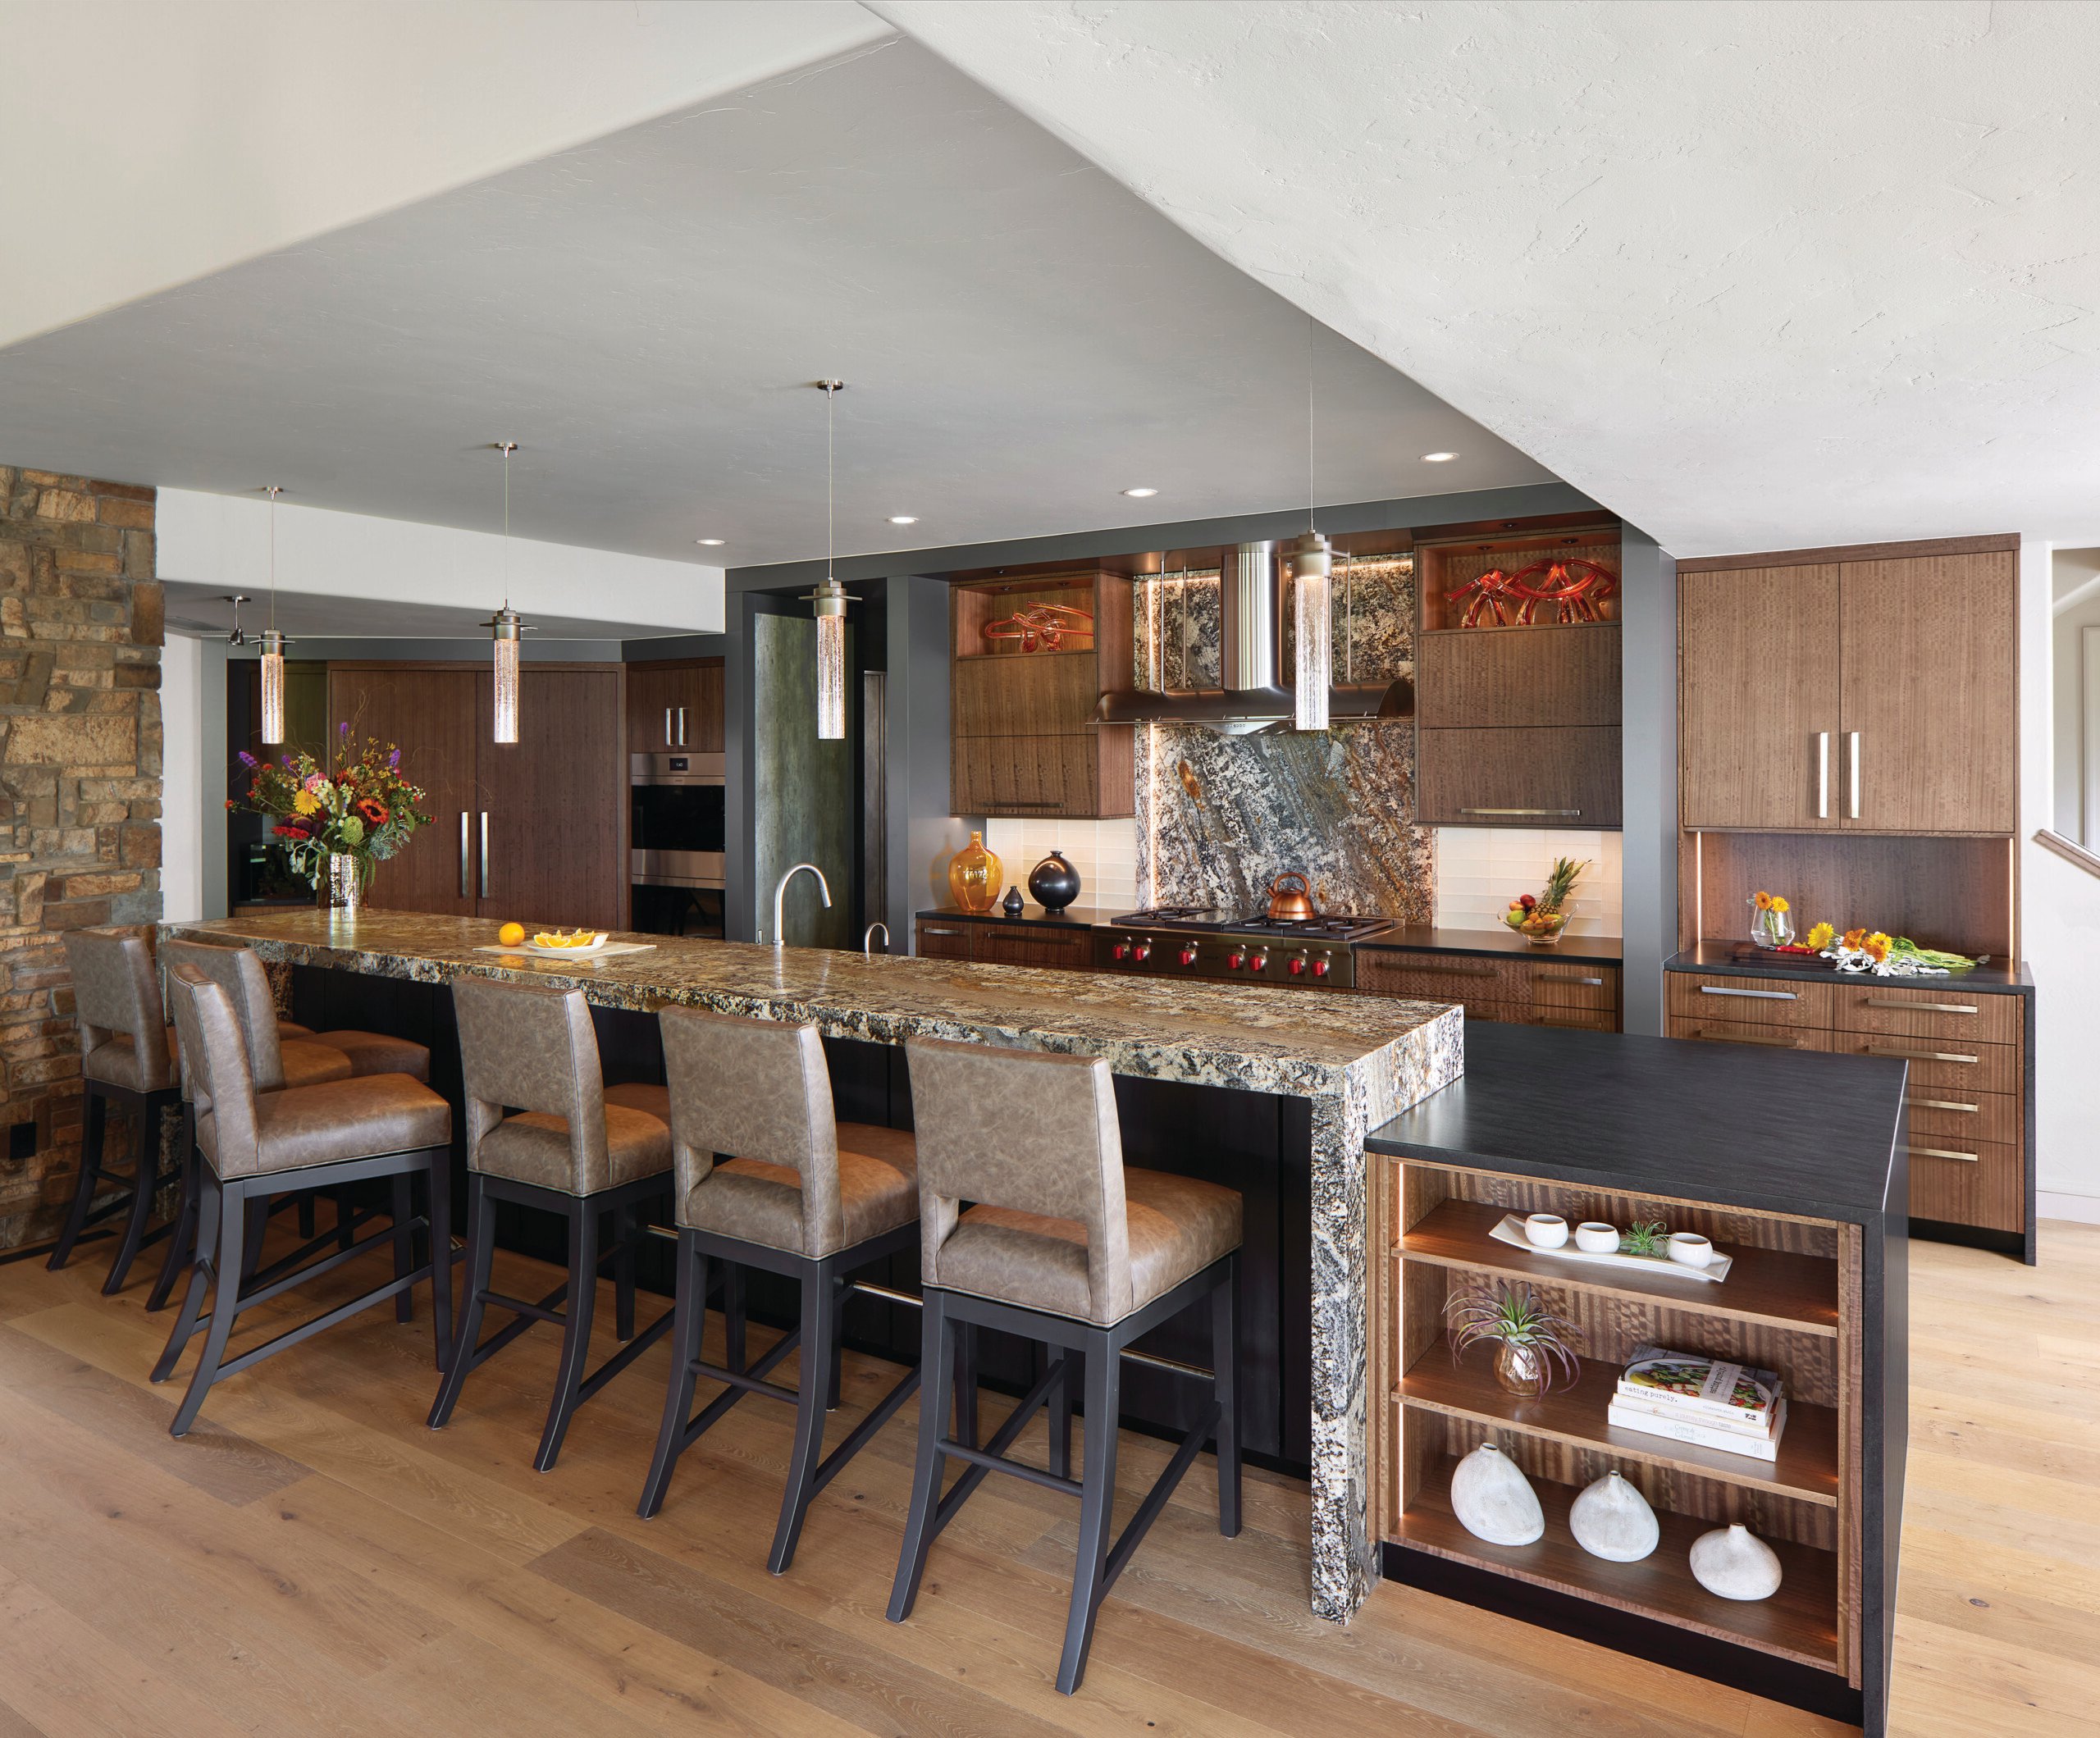 Designing your kitchen: functionality vs aesthetic - GROLLO HOMES